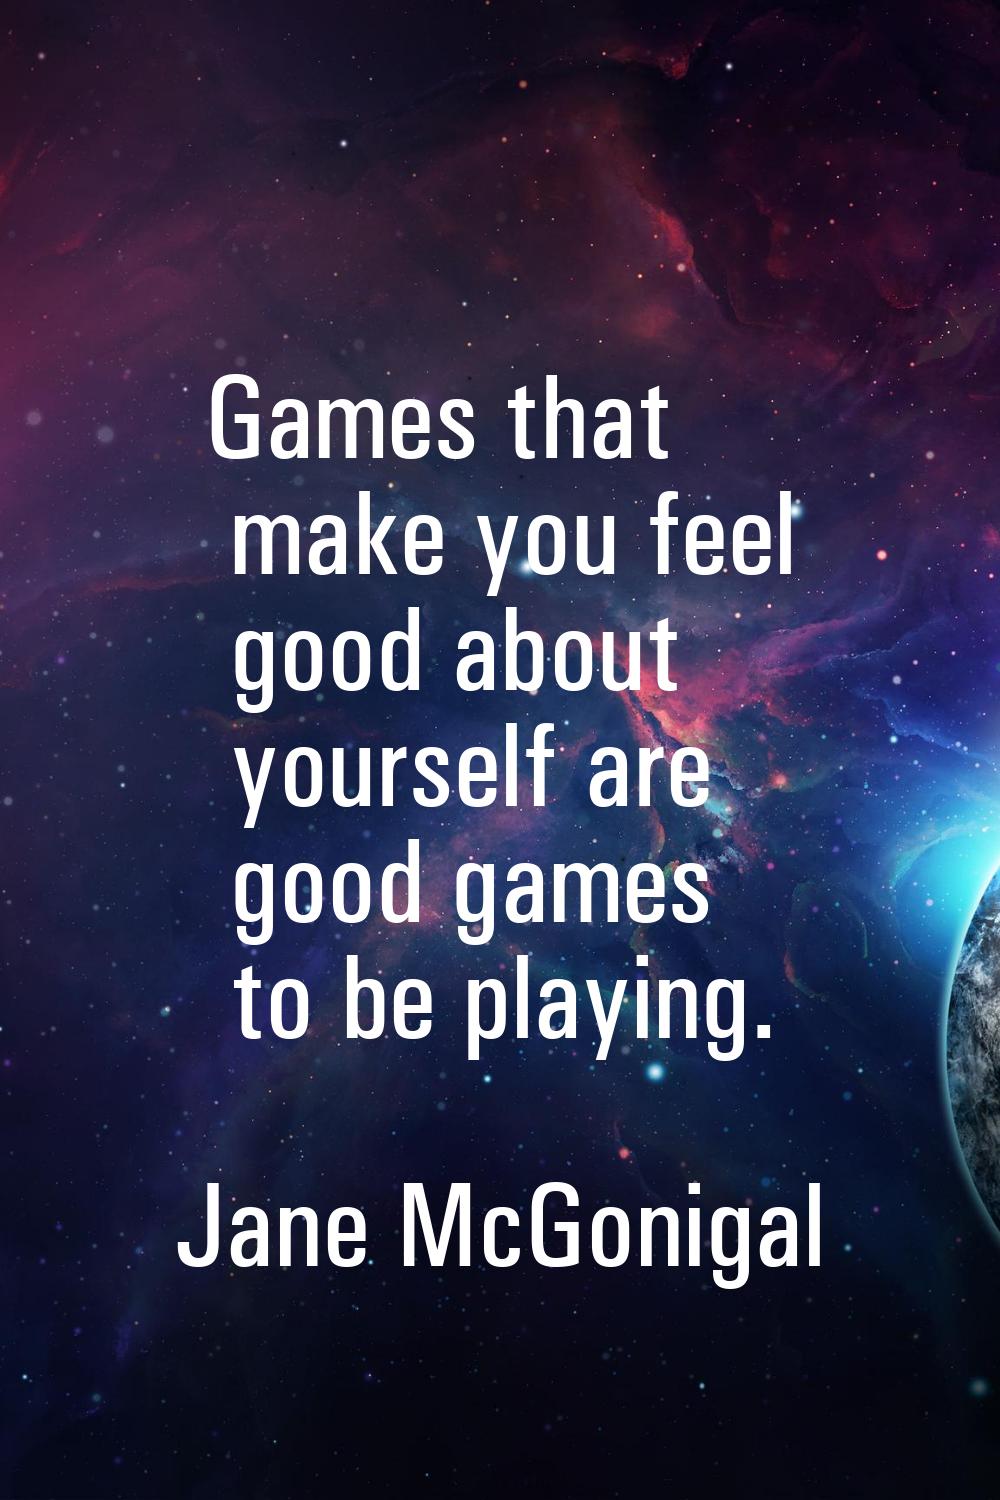 Games that make you feel good about yourself are good games to be playing.